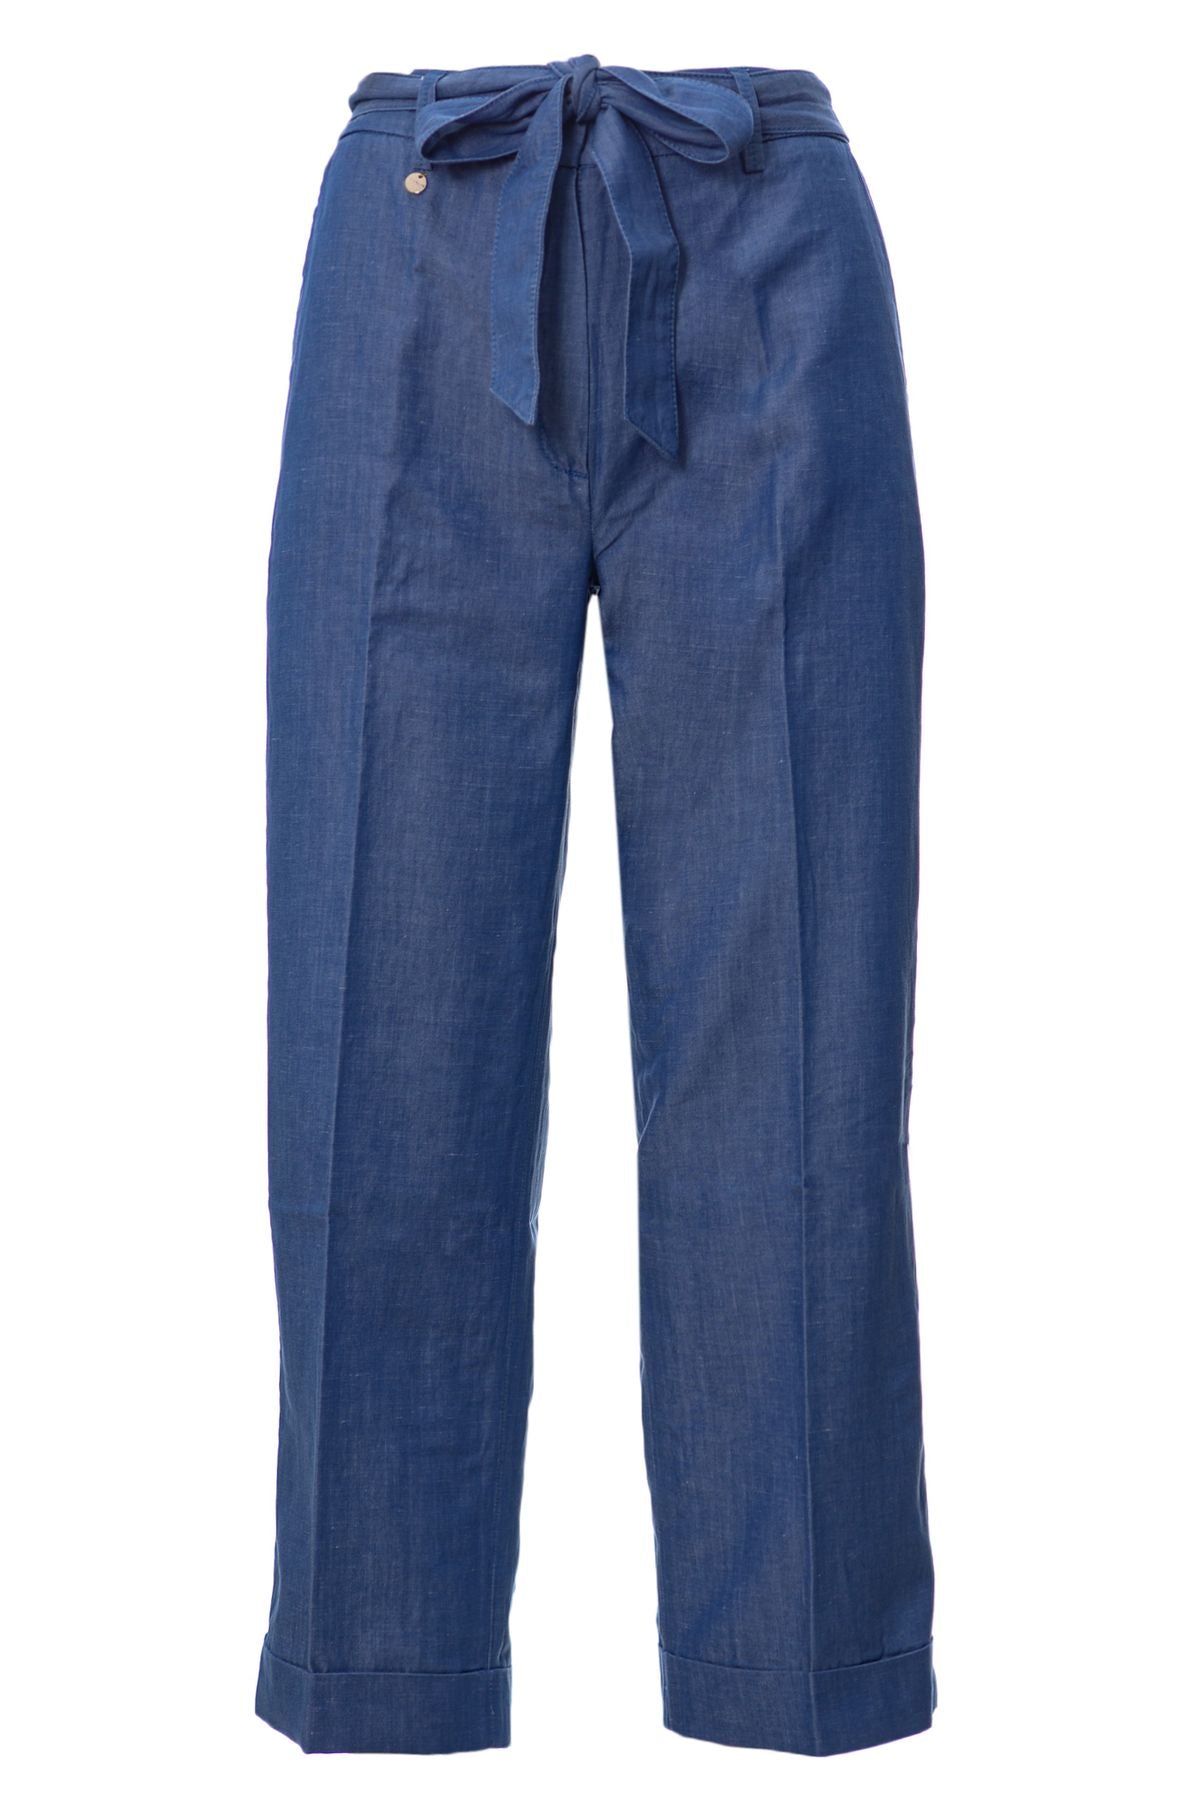 Re-HasH Spring/Summer Lyocell Trousers